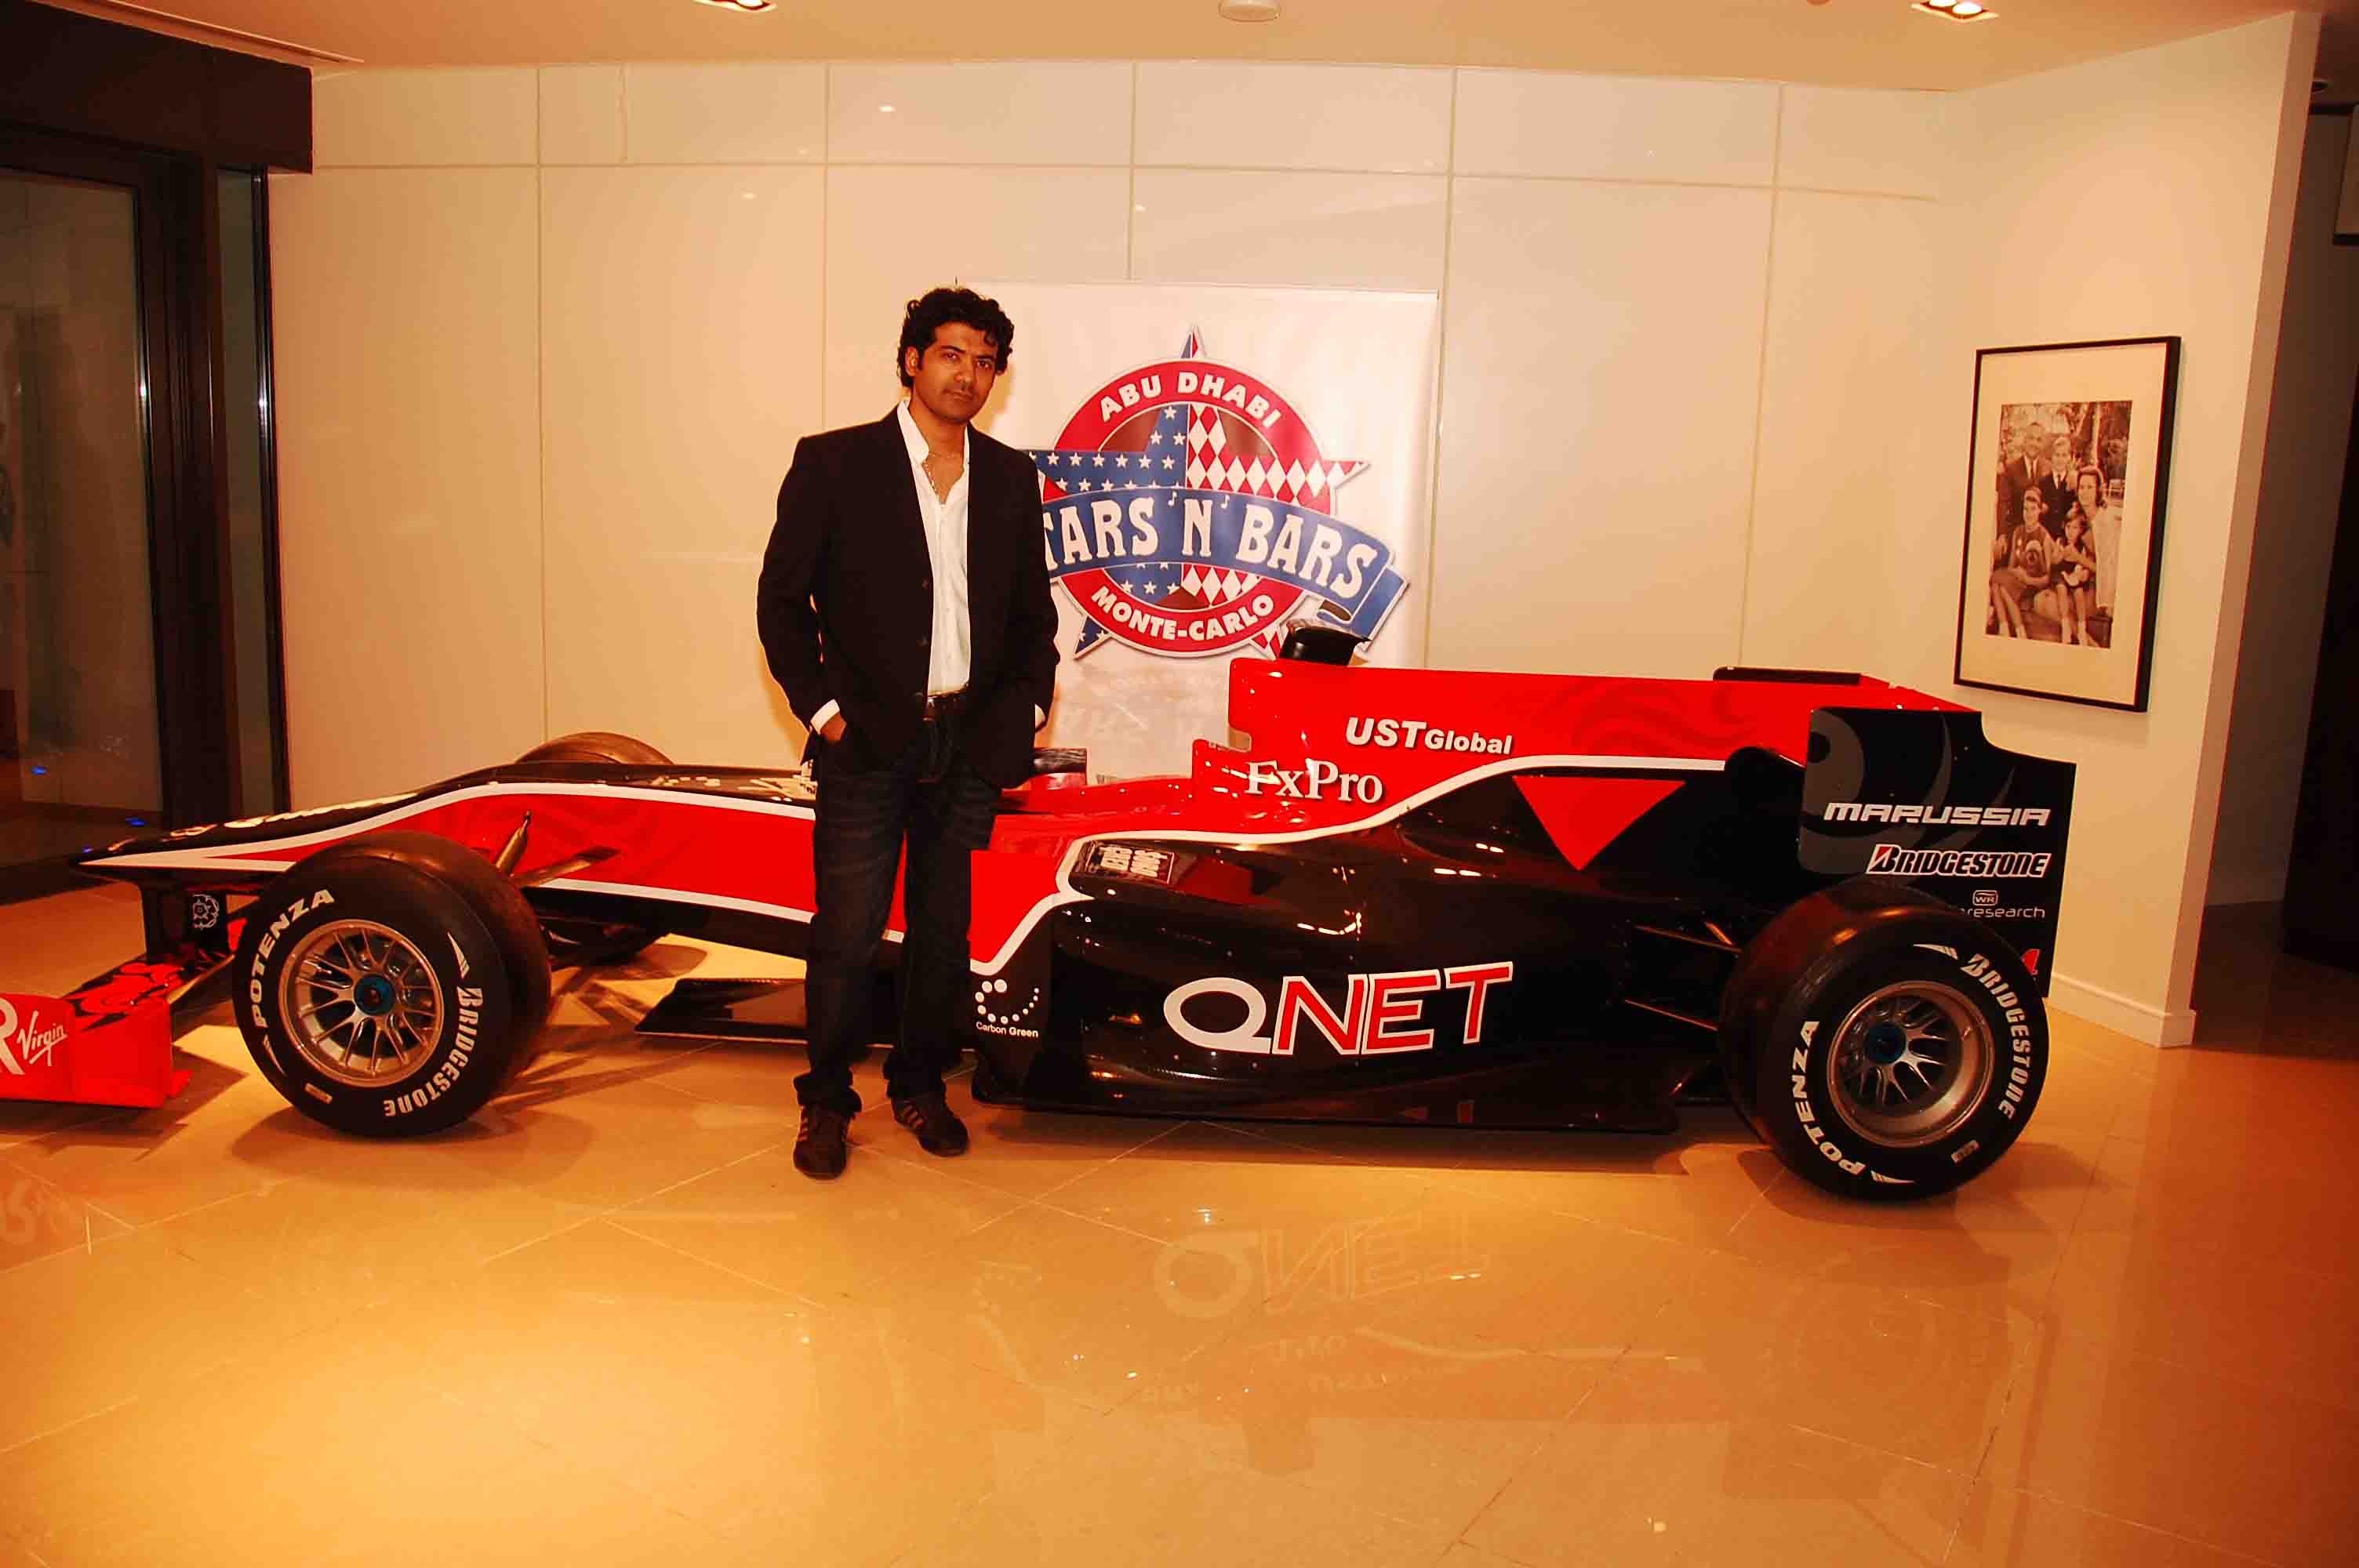 With the QNet Virgin Racing F1